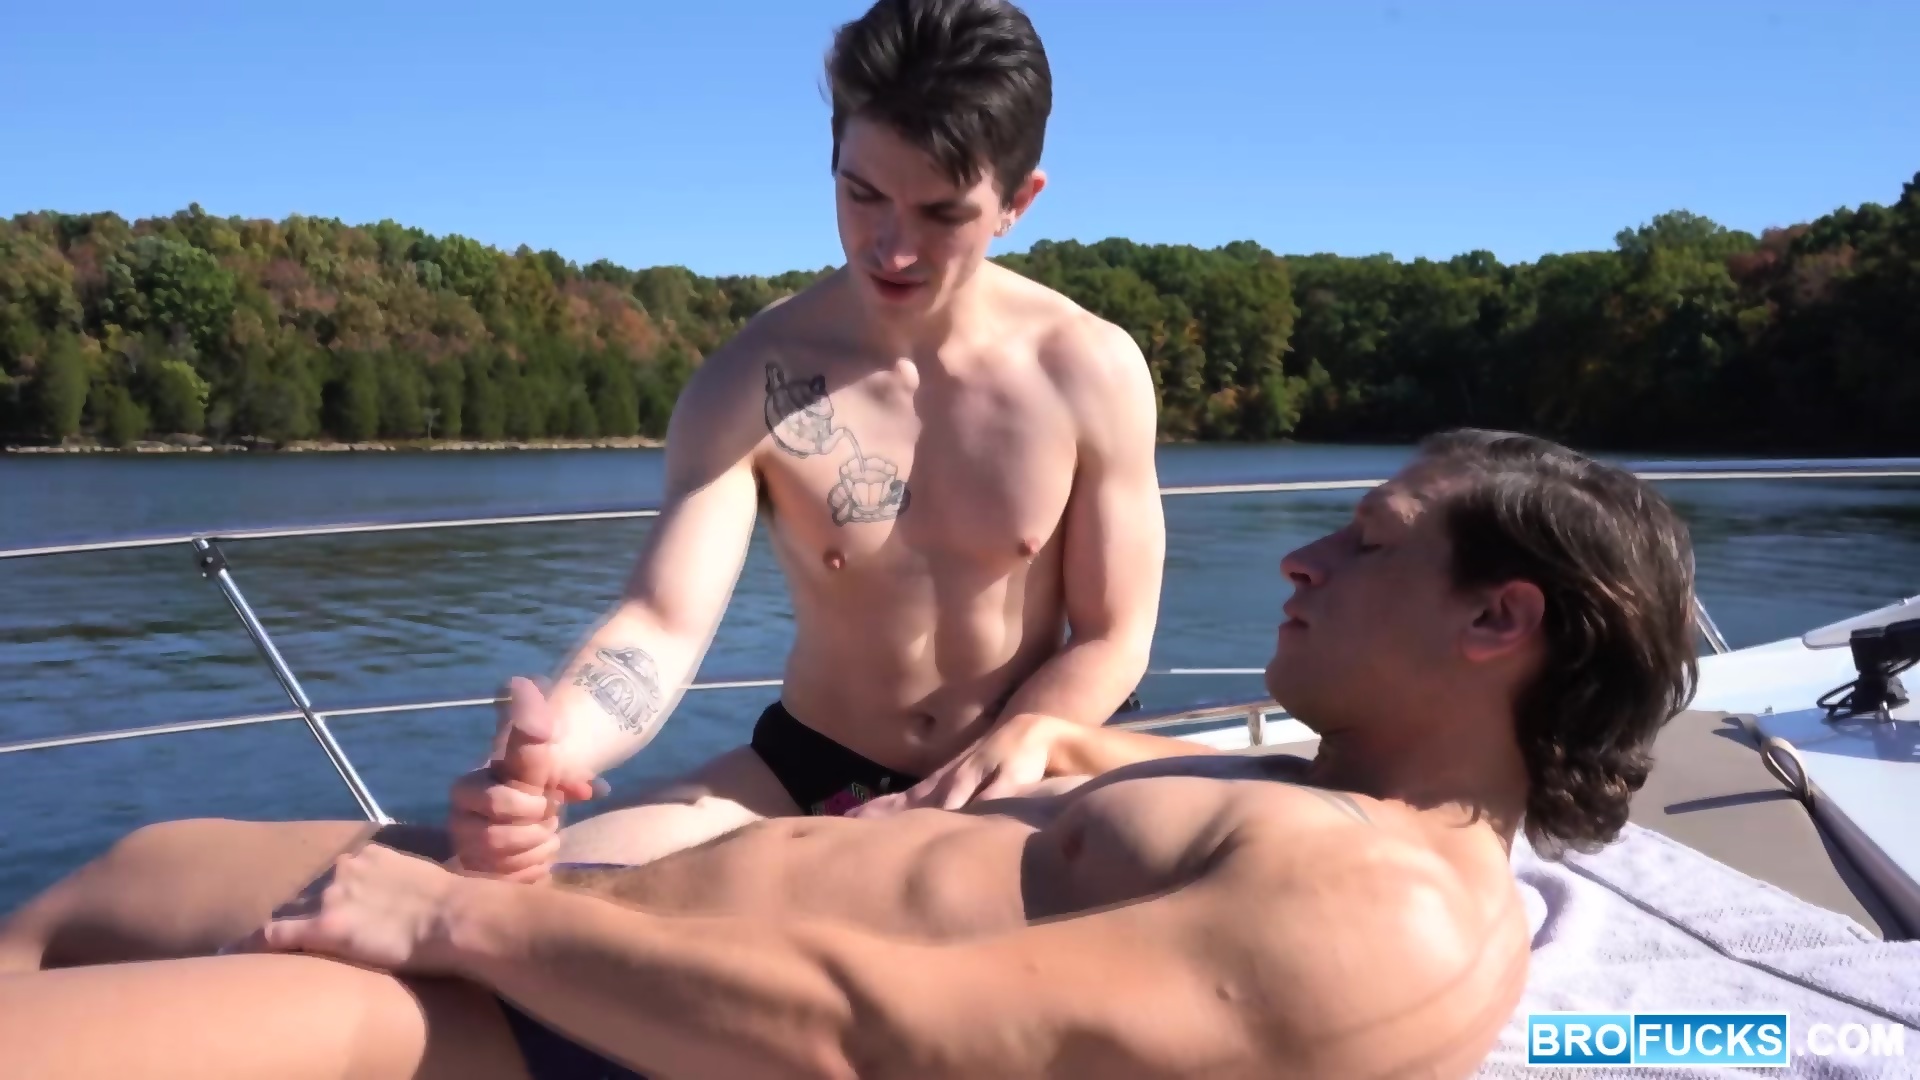 Nude Beach Sex On A Boat - Two Extremely Hot Gay Hunks Having Raw Sex On Boat! - EPORNER